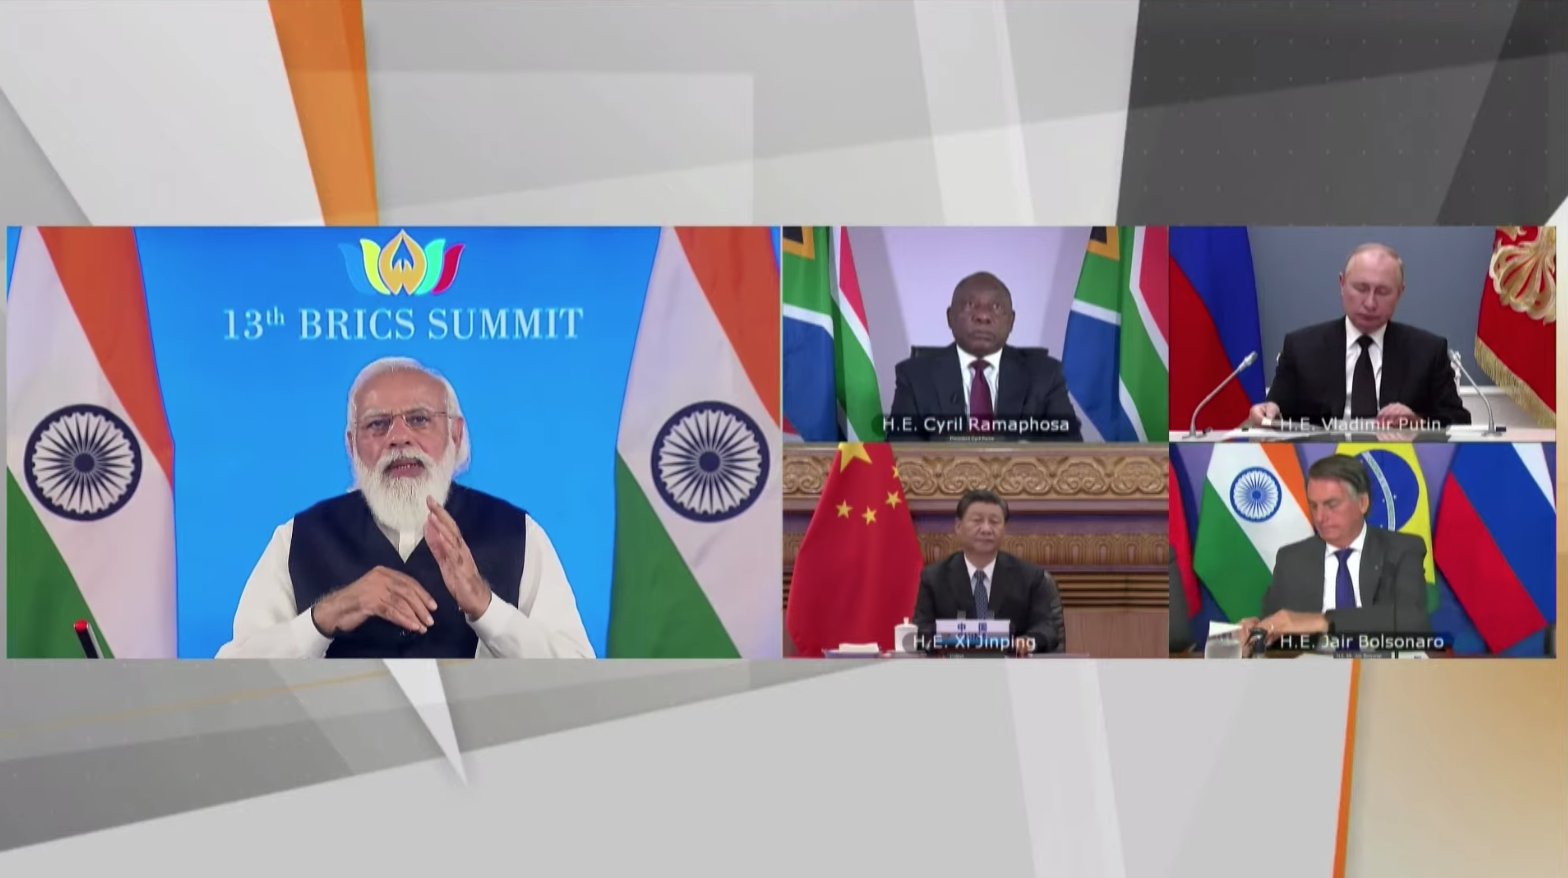 PM Modi chairs 13th BRICS Summit and gives 4C Mantra 